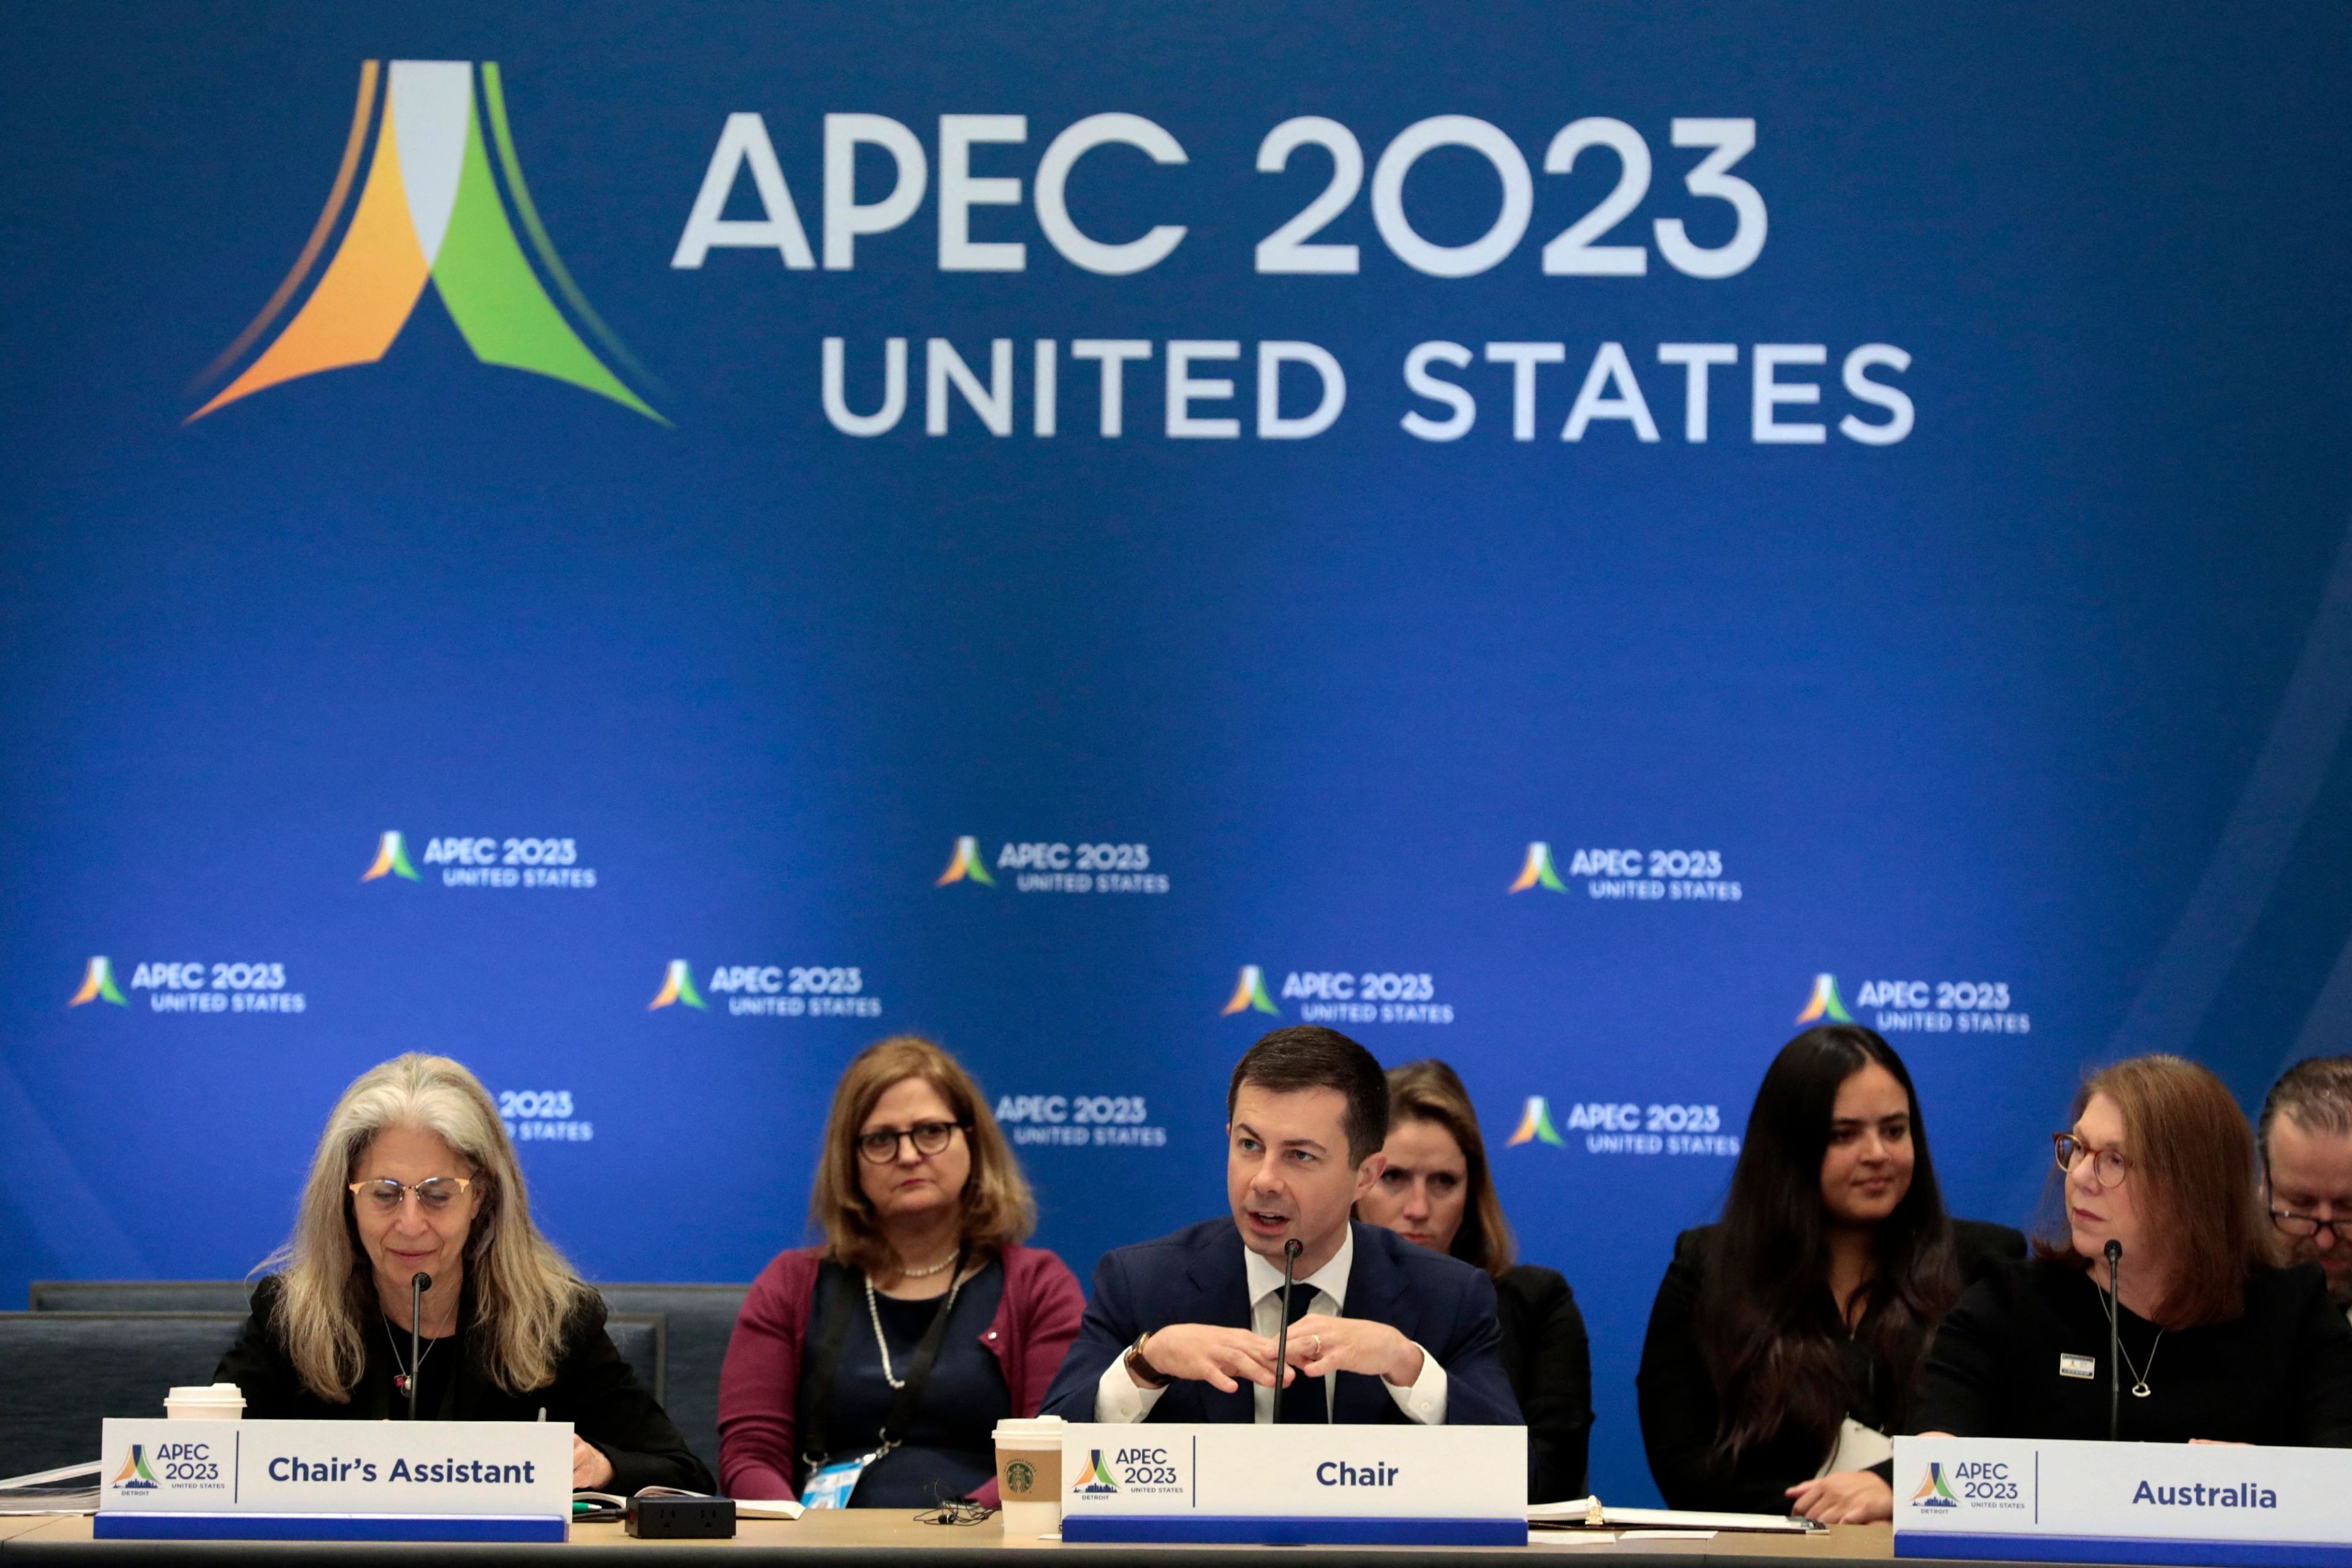 Here comes APEC: What the international conference means for San Francisco